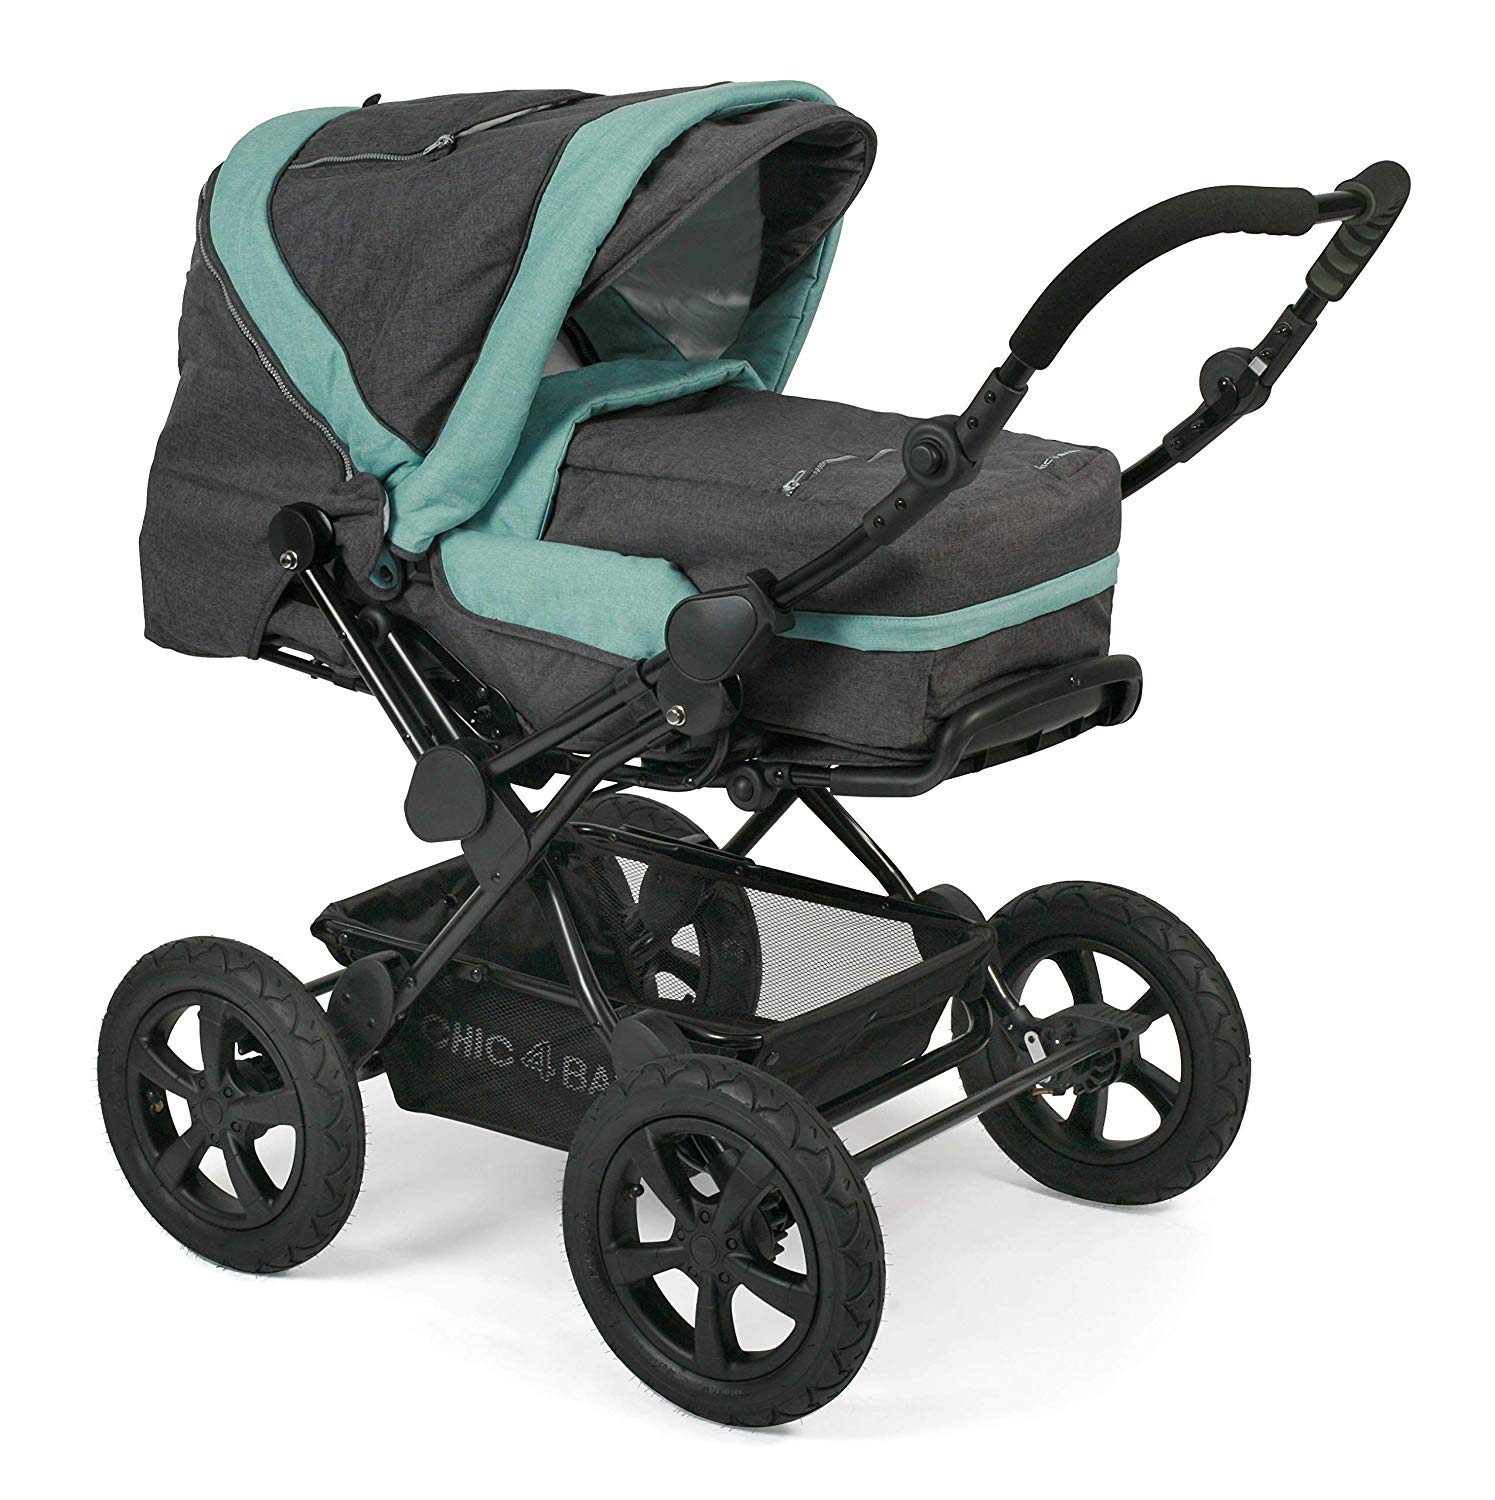 CHIC 4 BABY Viva 100 65 Combi Pushchair with Carry Bag Jeans Melange Mint Grey